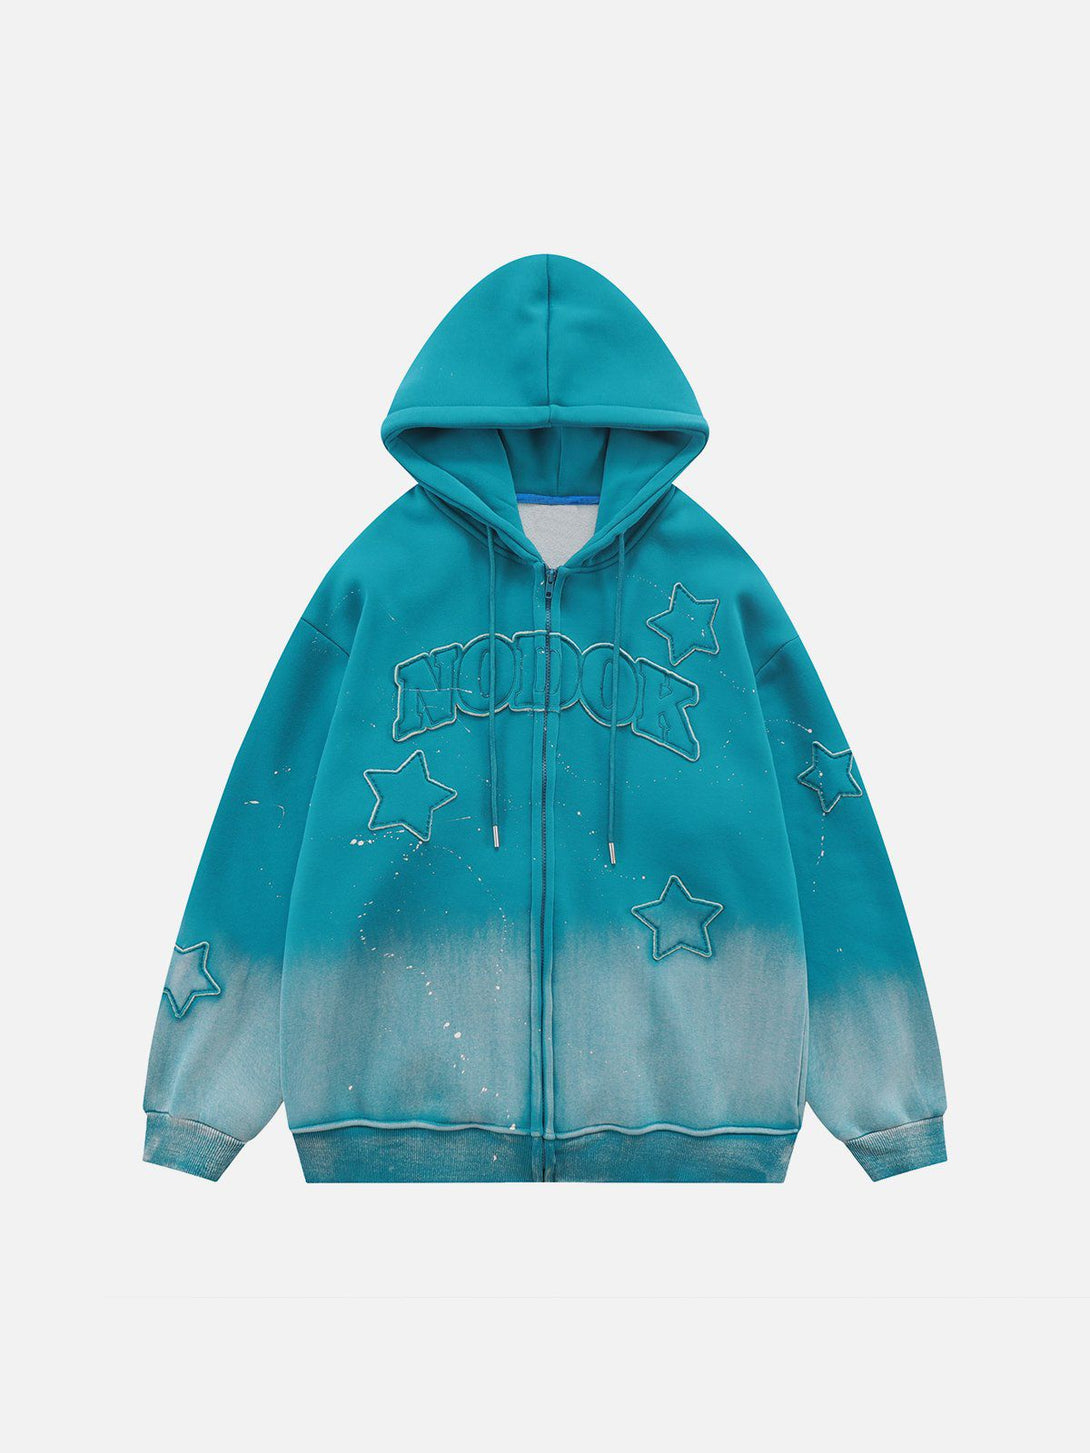 Levefly - Distressed Gradient Applique Stars Hoodie - Streetwear Fashion - levefly.com